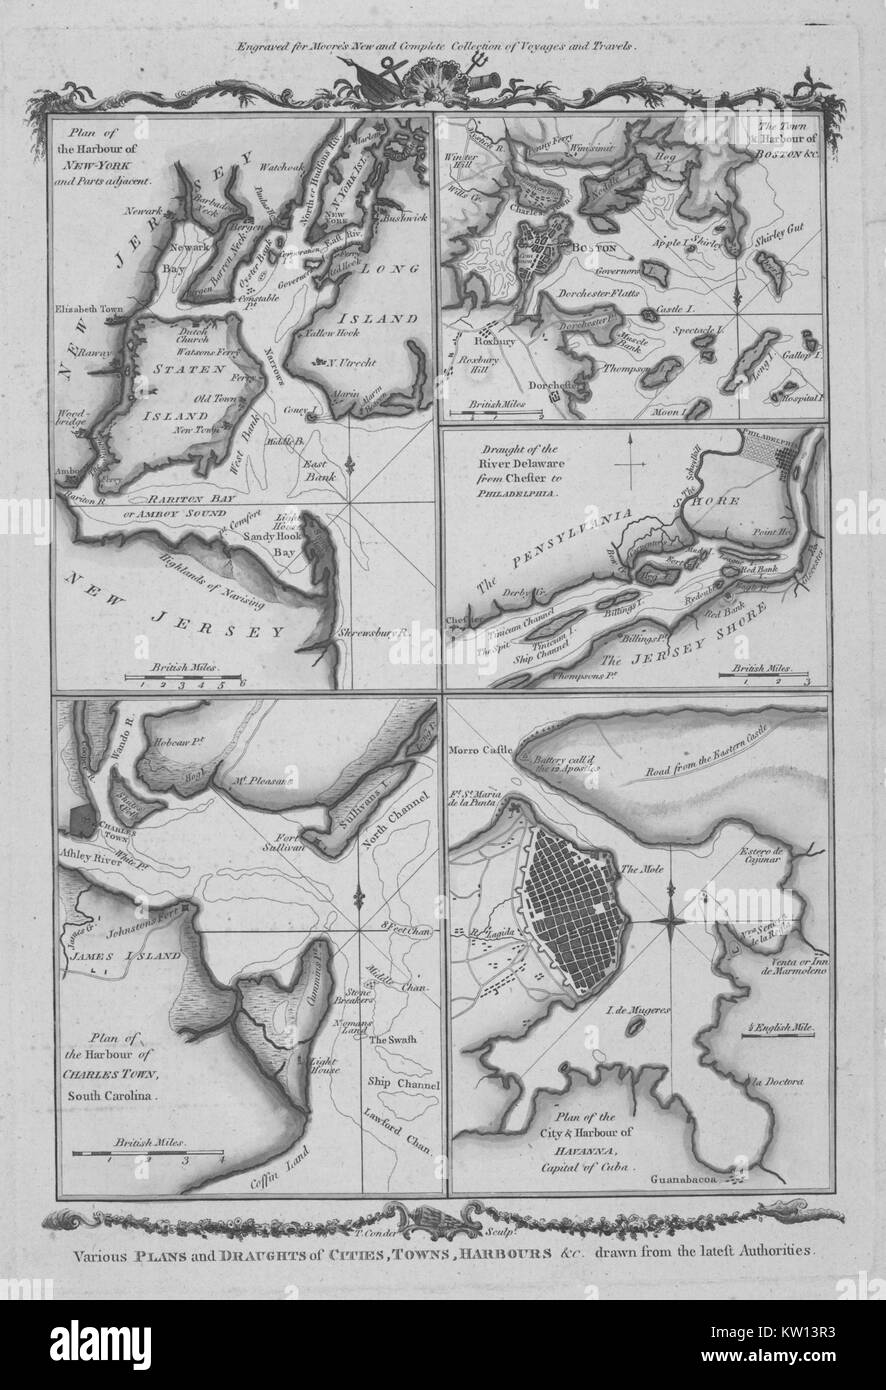 An image that consists of five separate drawings, plans appear for the Harbor of New York, Charleston, South Carolina and Havana, Cuba, maps of a section of Boston and a section of the Delaware River are also featured, 1778. From the New York Public Library. Stock Photo